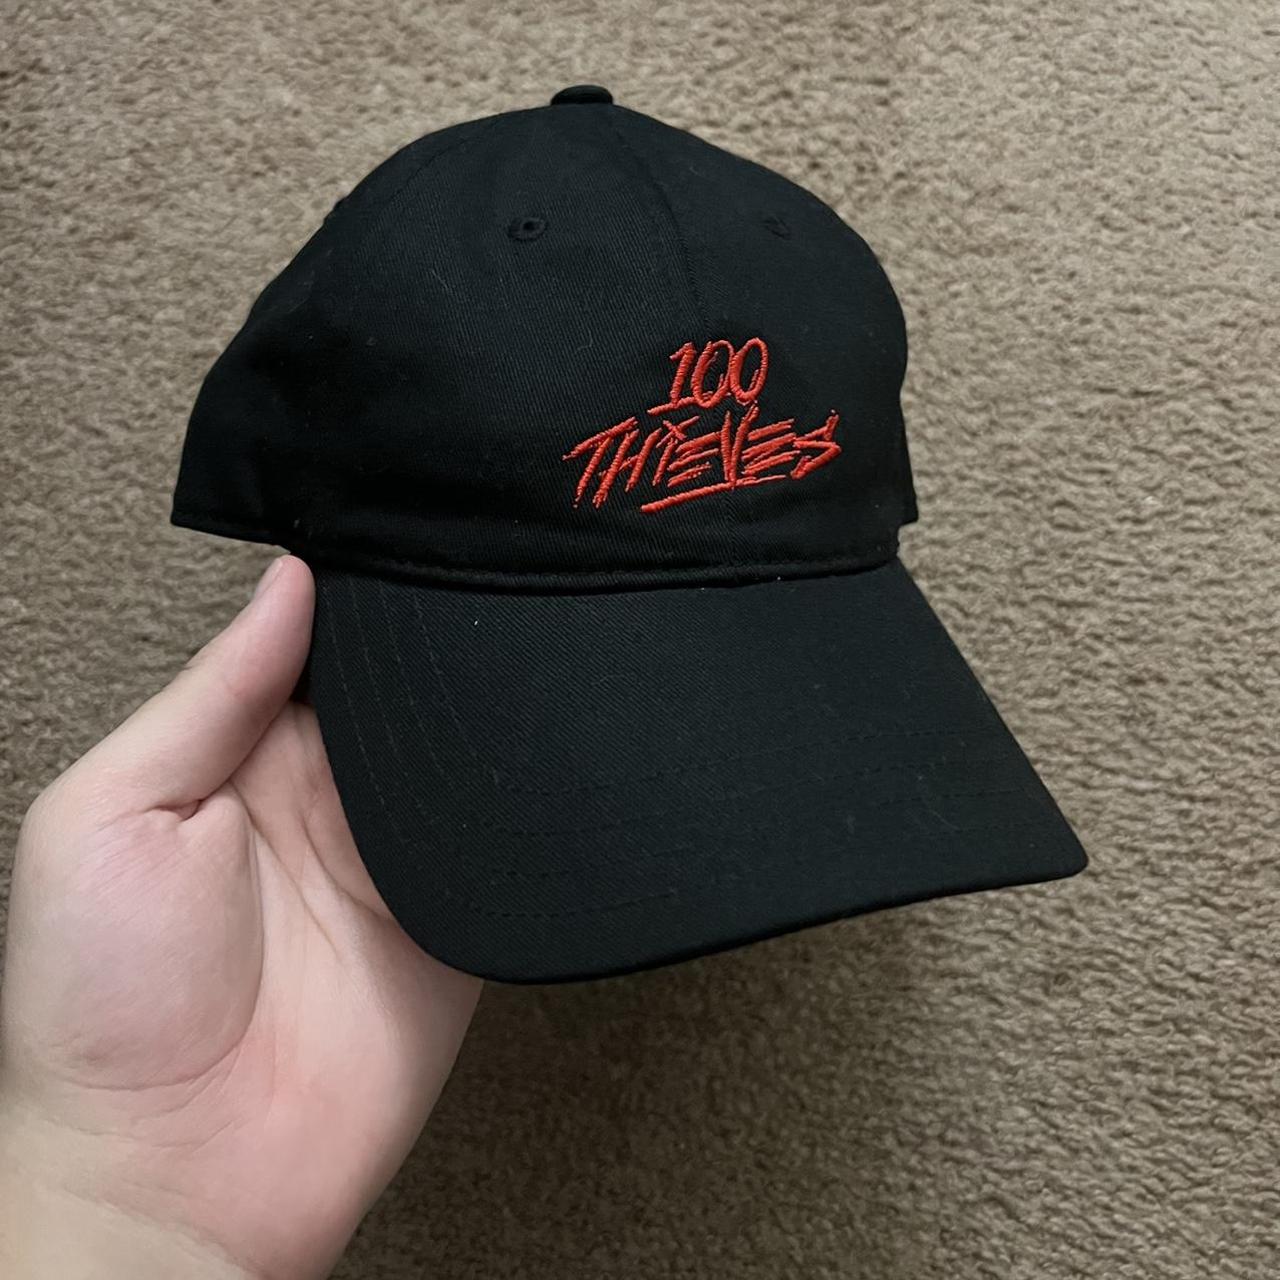 Men's Black and Red Hat